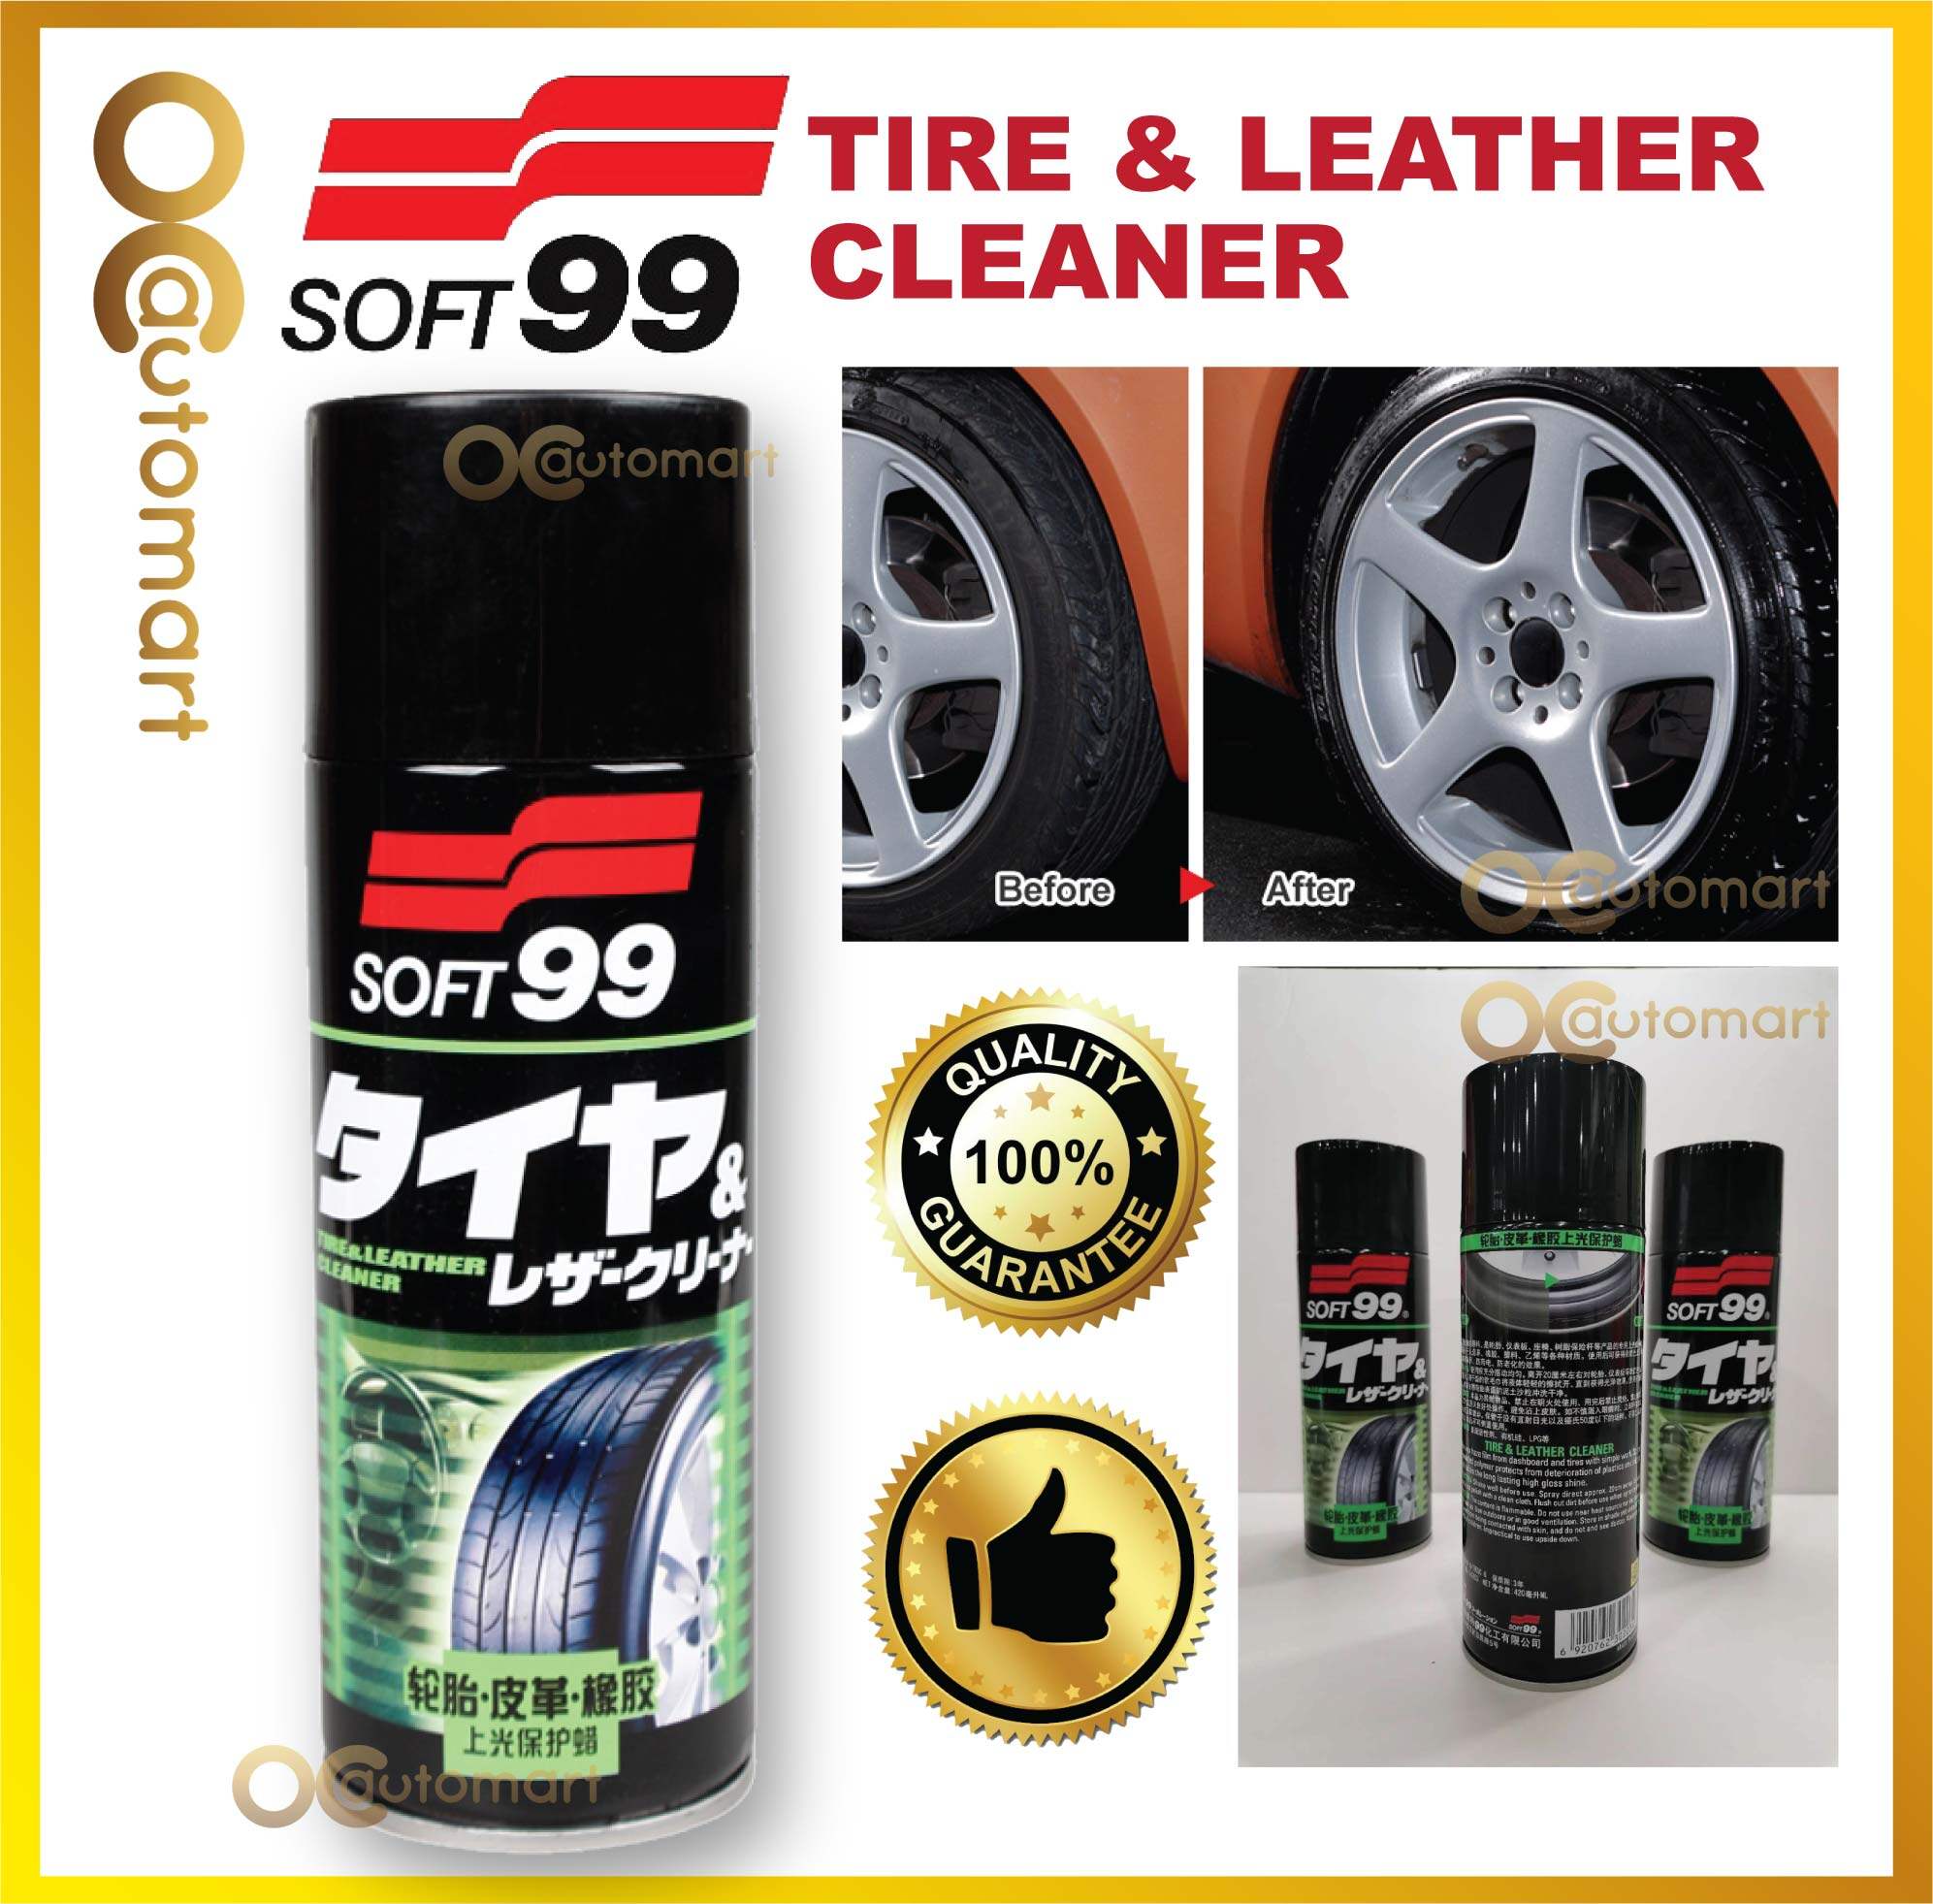 Soft99 / Soft 99 Leather / Rubber / Tire Spray Wax 420ml